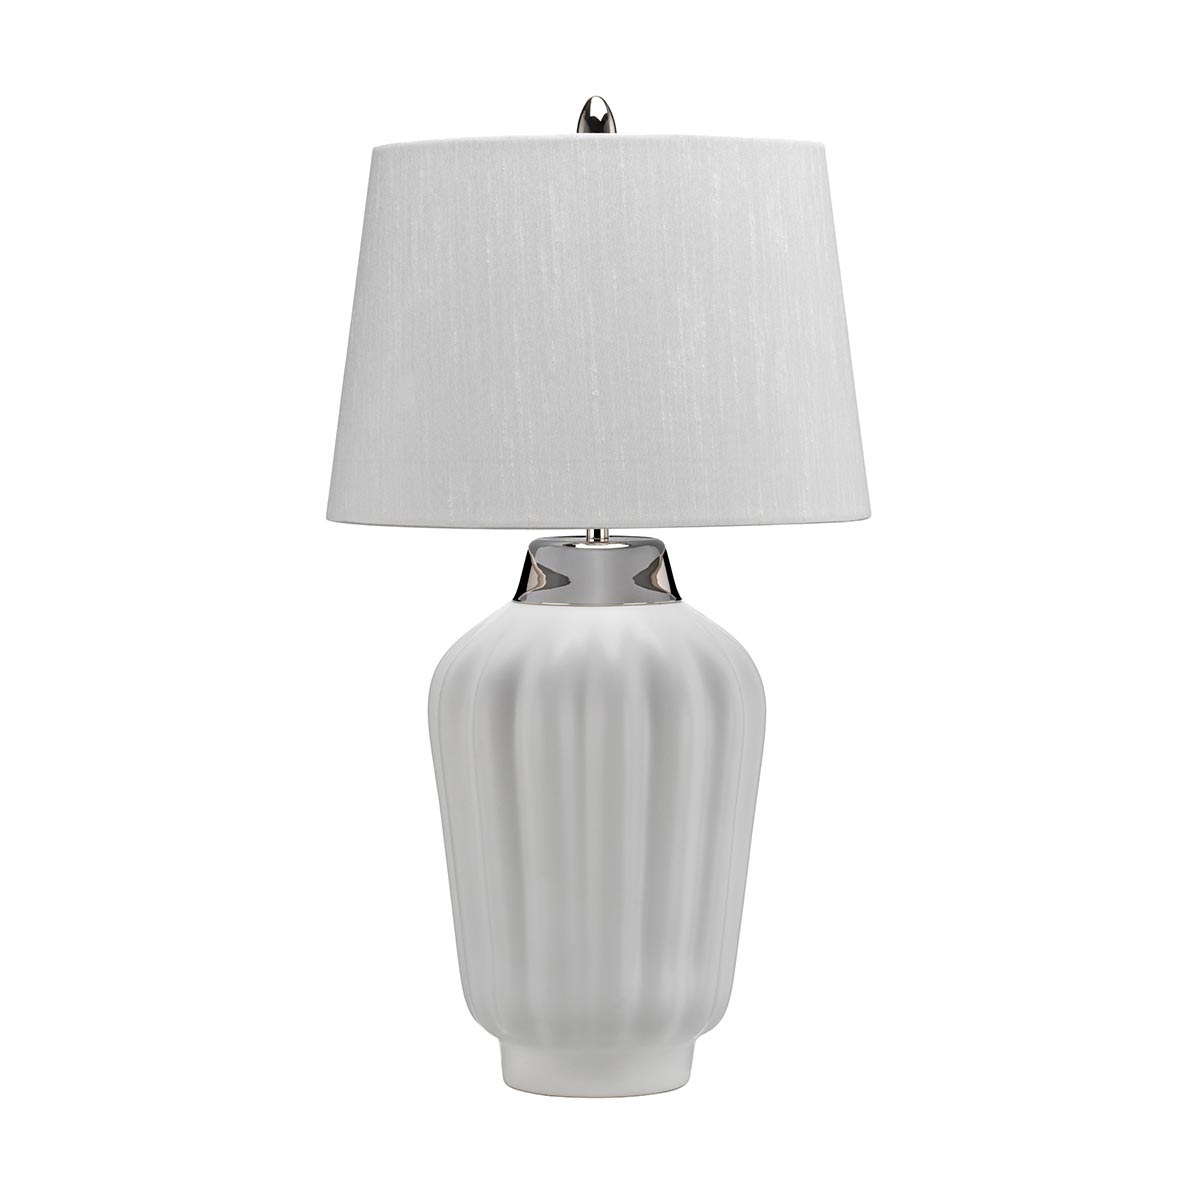 Quintiesse Bexley 1 Light White Ceramic Table Lamp Polished Nickel